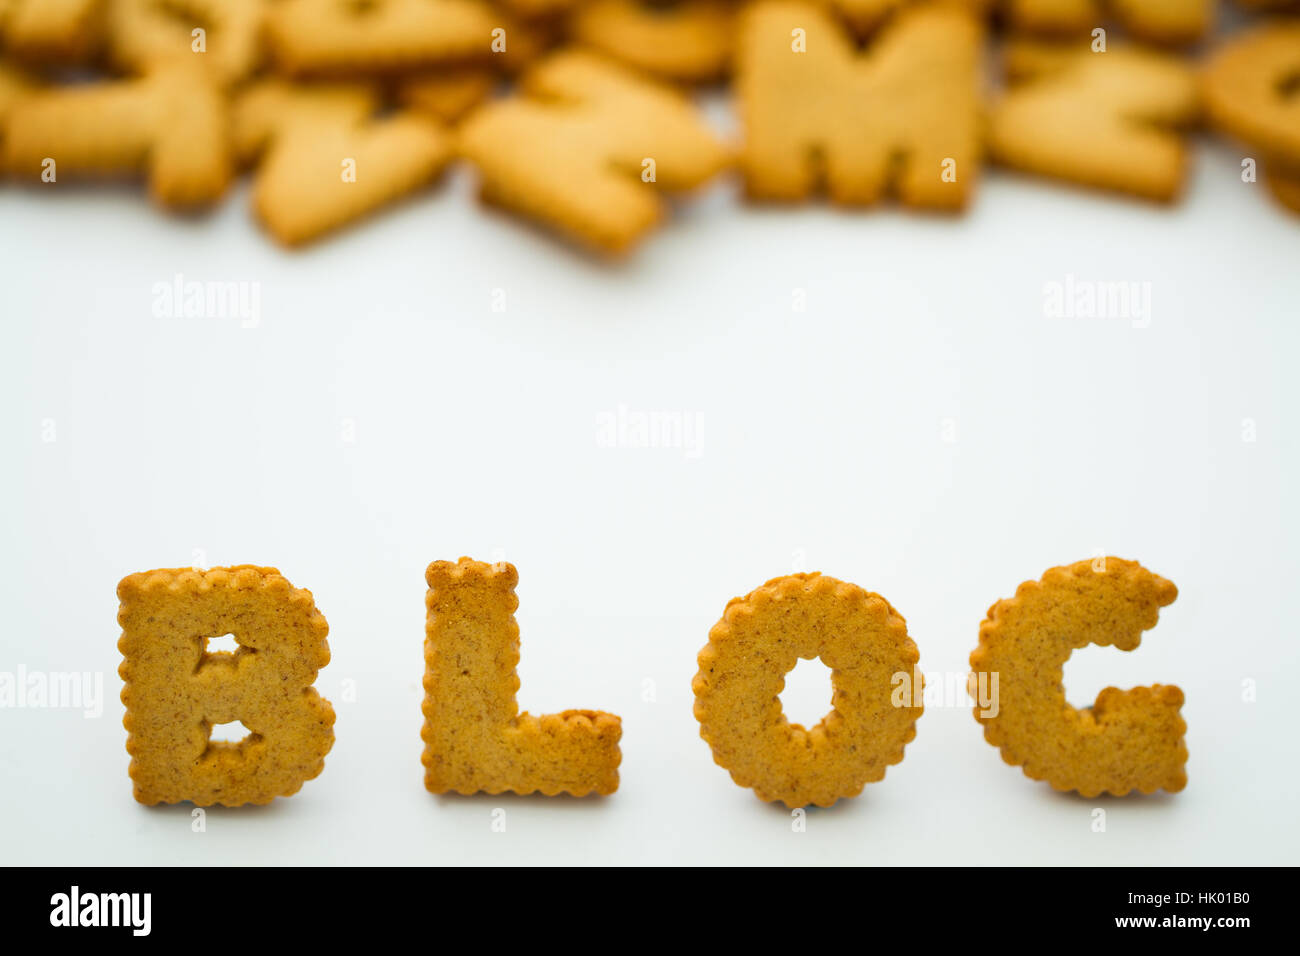 The word blog created from alphabet shaped cookies and biscuits on a white background for a food blogger. Stock Photo